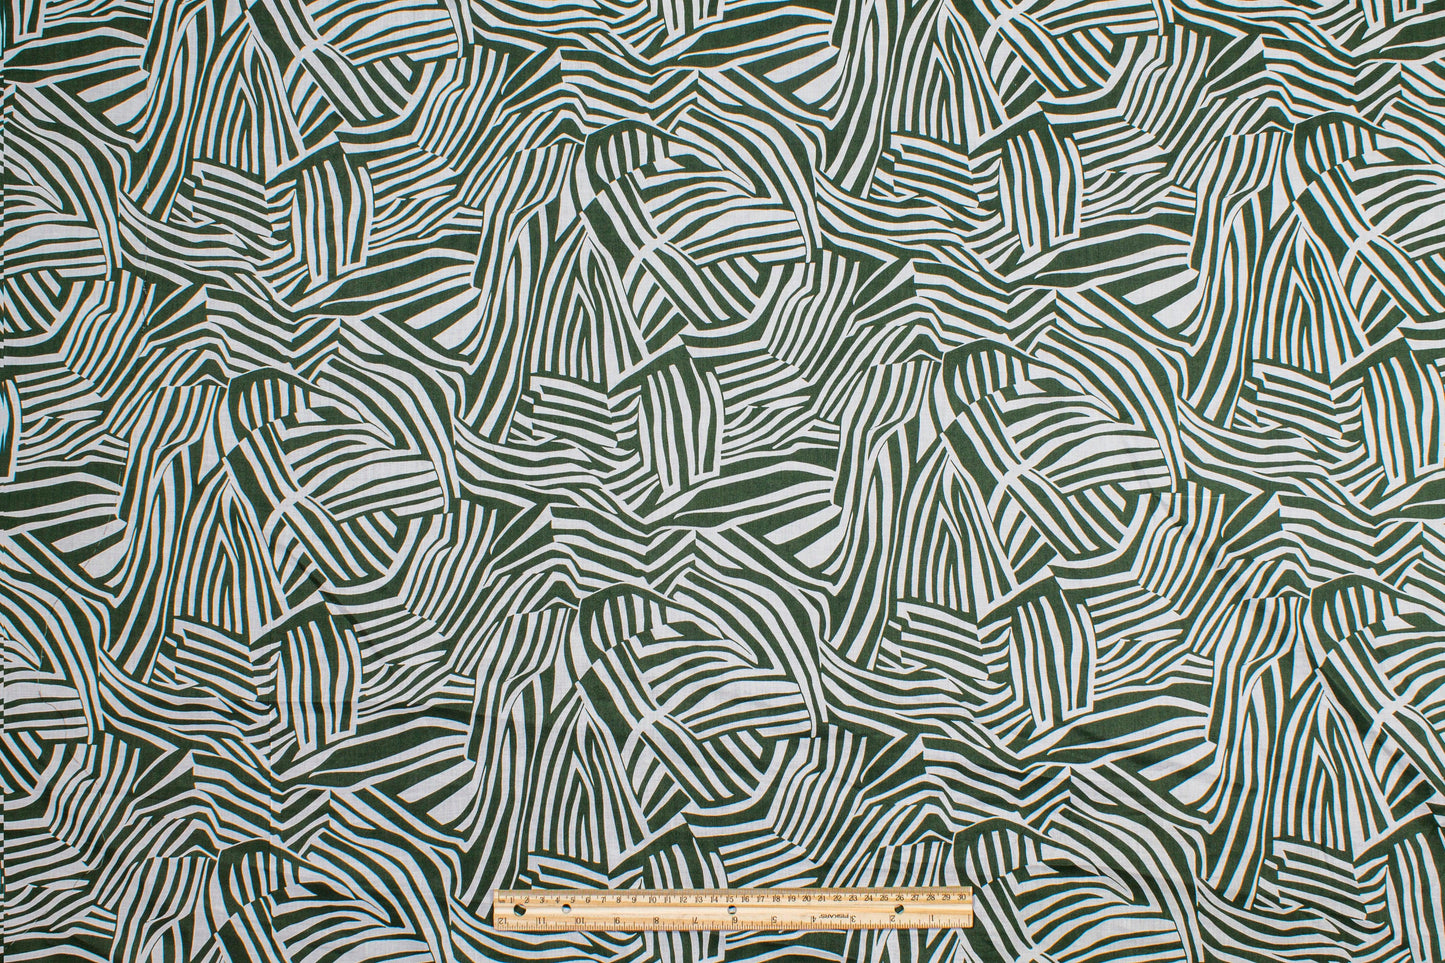 Abstract Zebra Print Cotton Voile - Green and White - Prime Fabrics